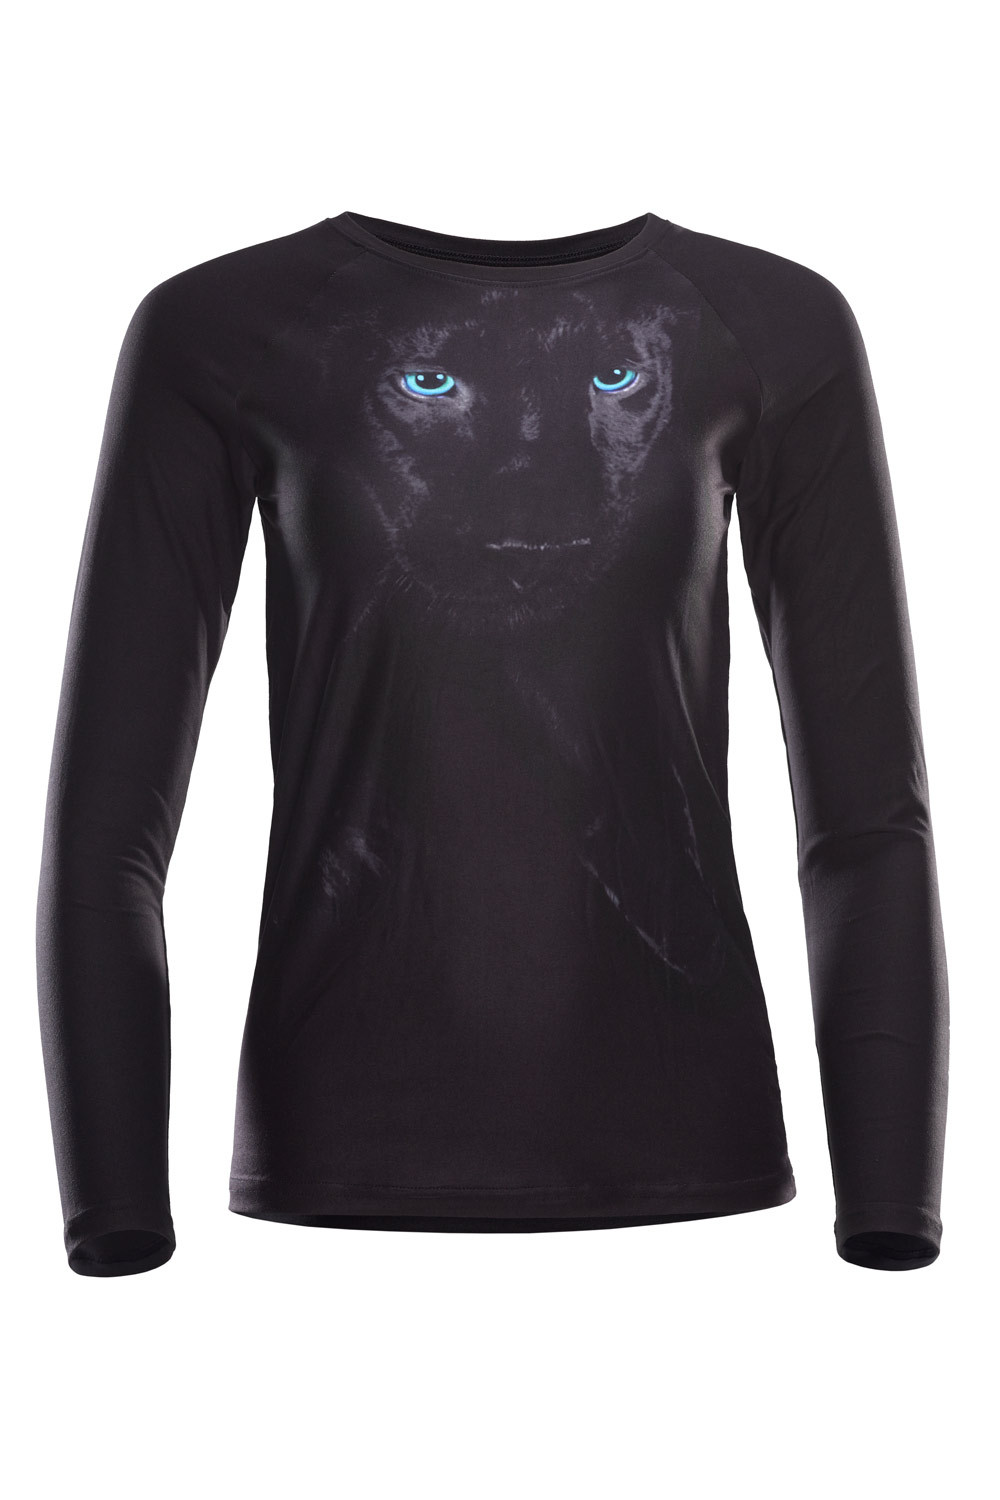 Soft Panther, AET120LS, Winshape Long Ultra Functional Top Sleeve Soft and Light Style